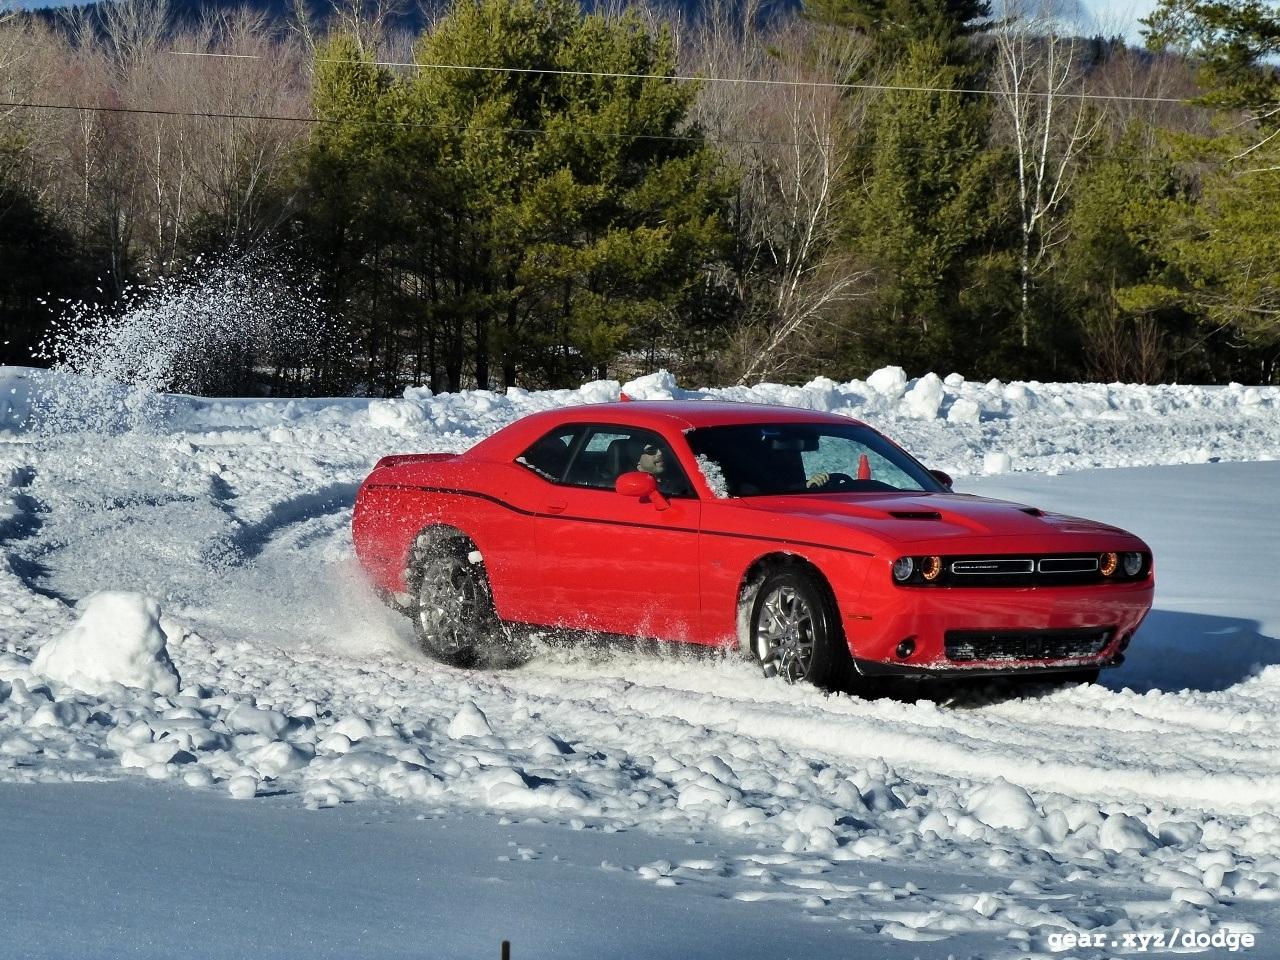 2017 Dodge Challenger GT AWD First Drive: Four-season Grand Touring in